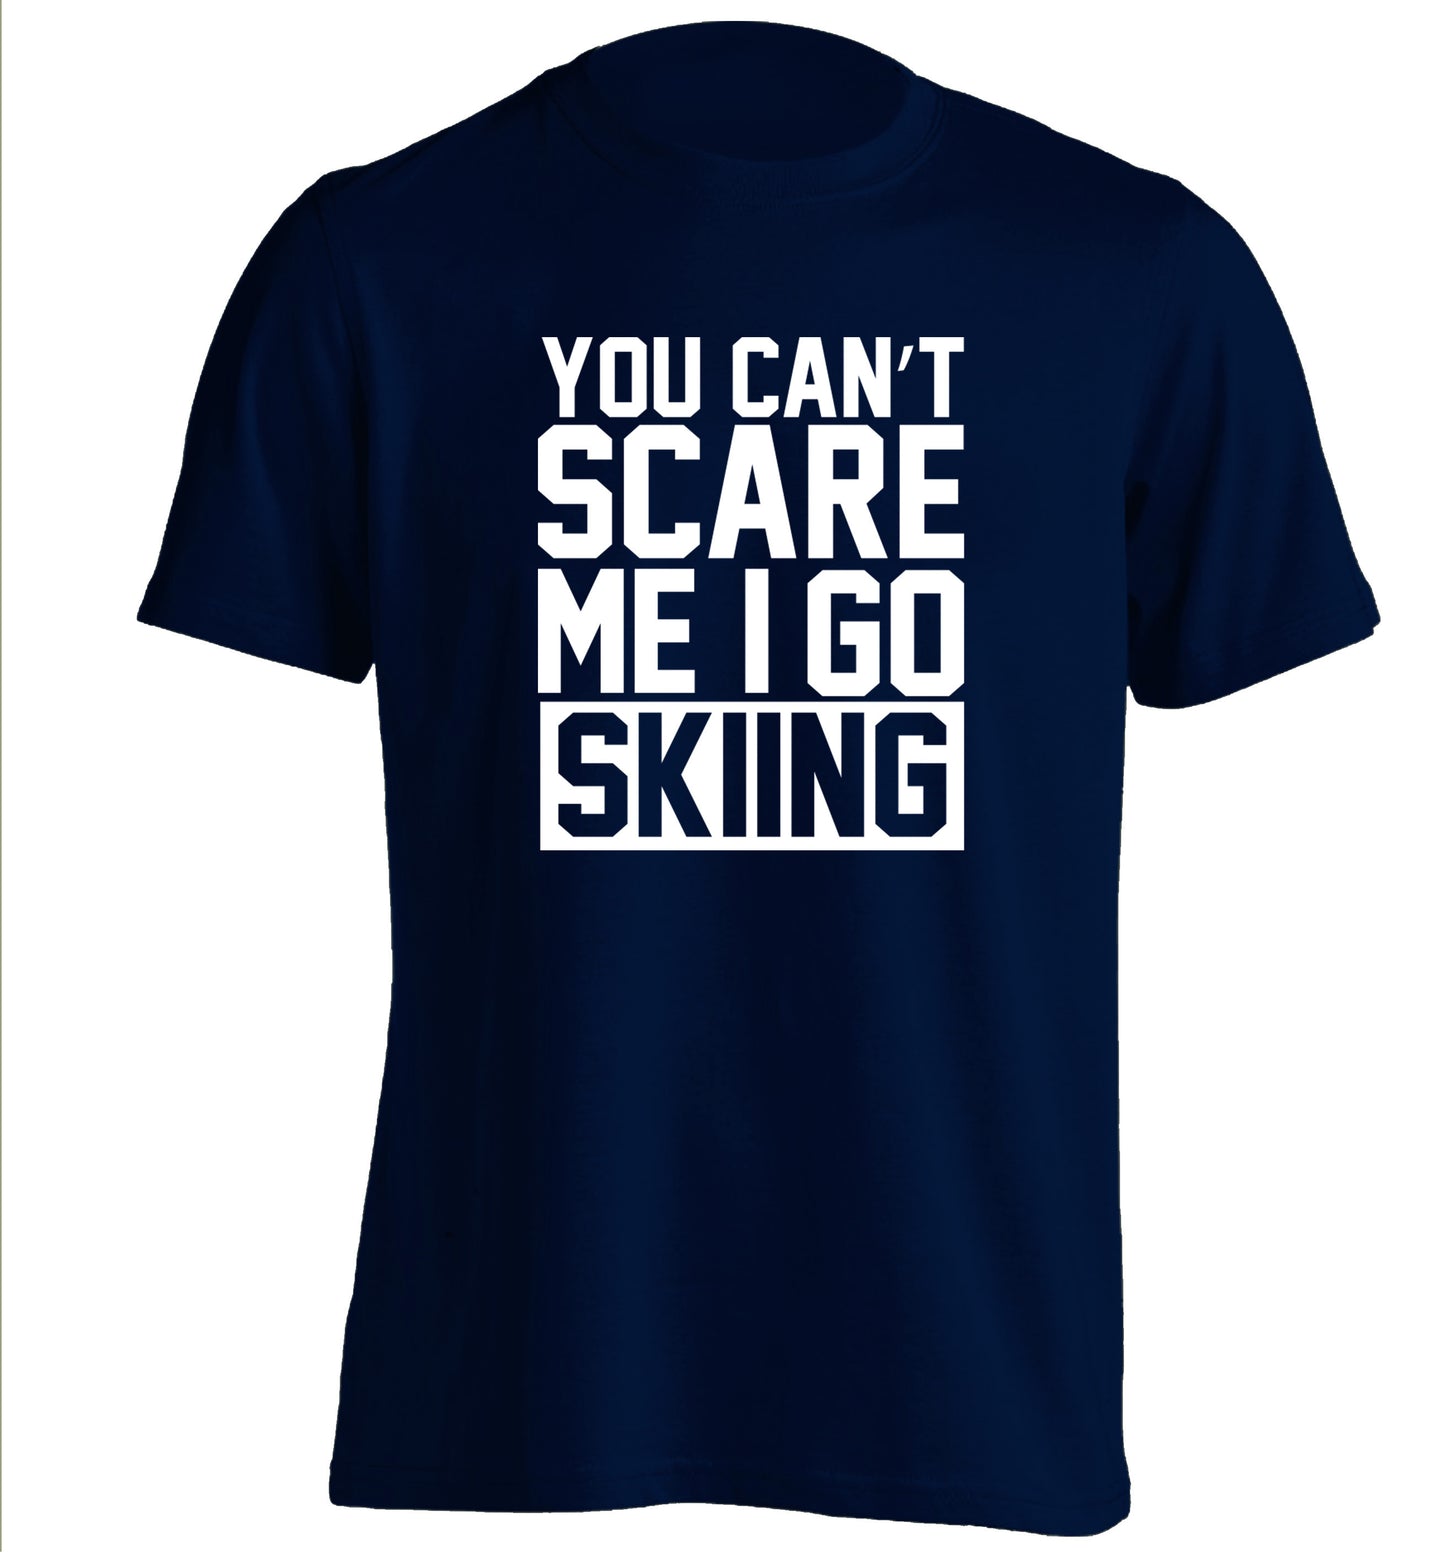 You can't scare me I go skiing adults unisex navy Tshirt 2XL